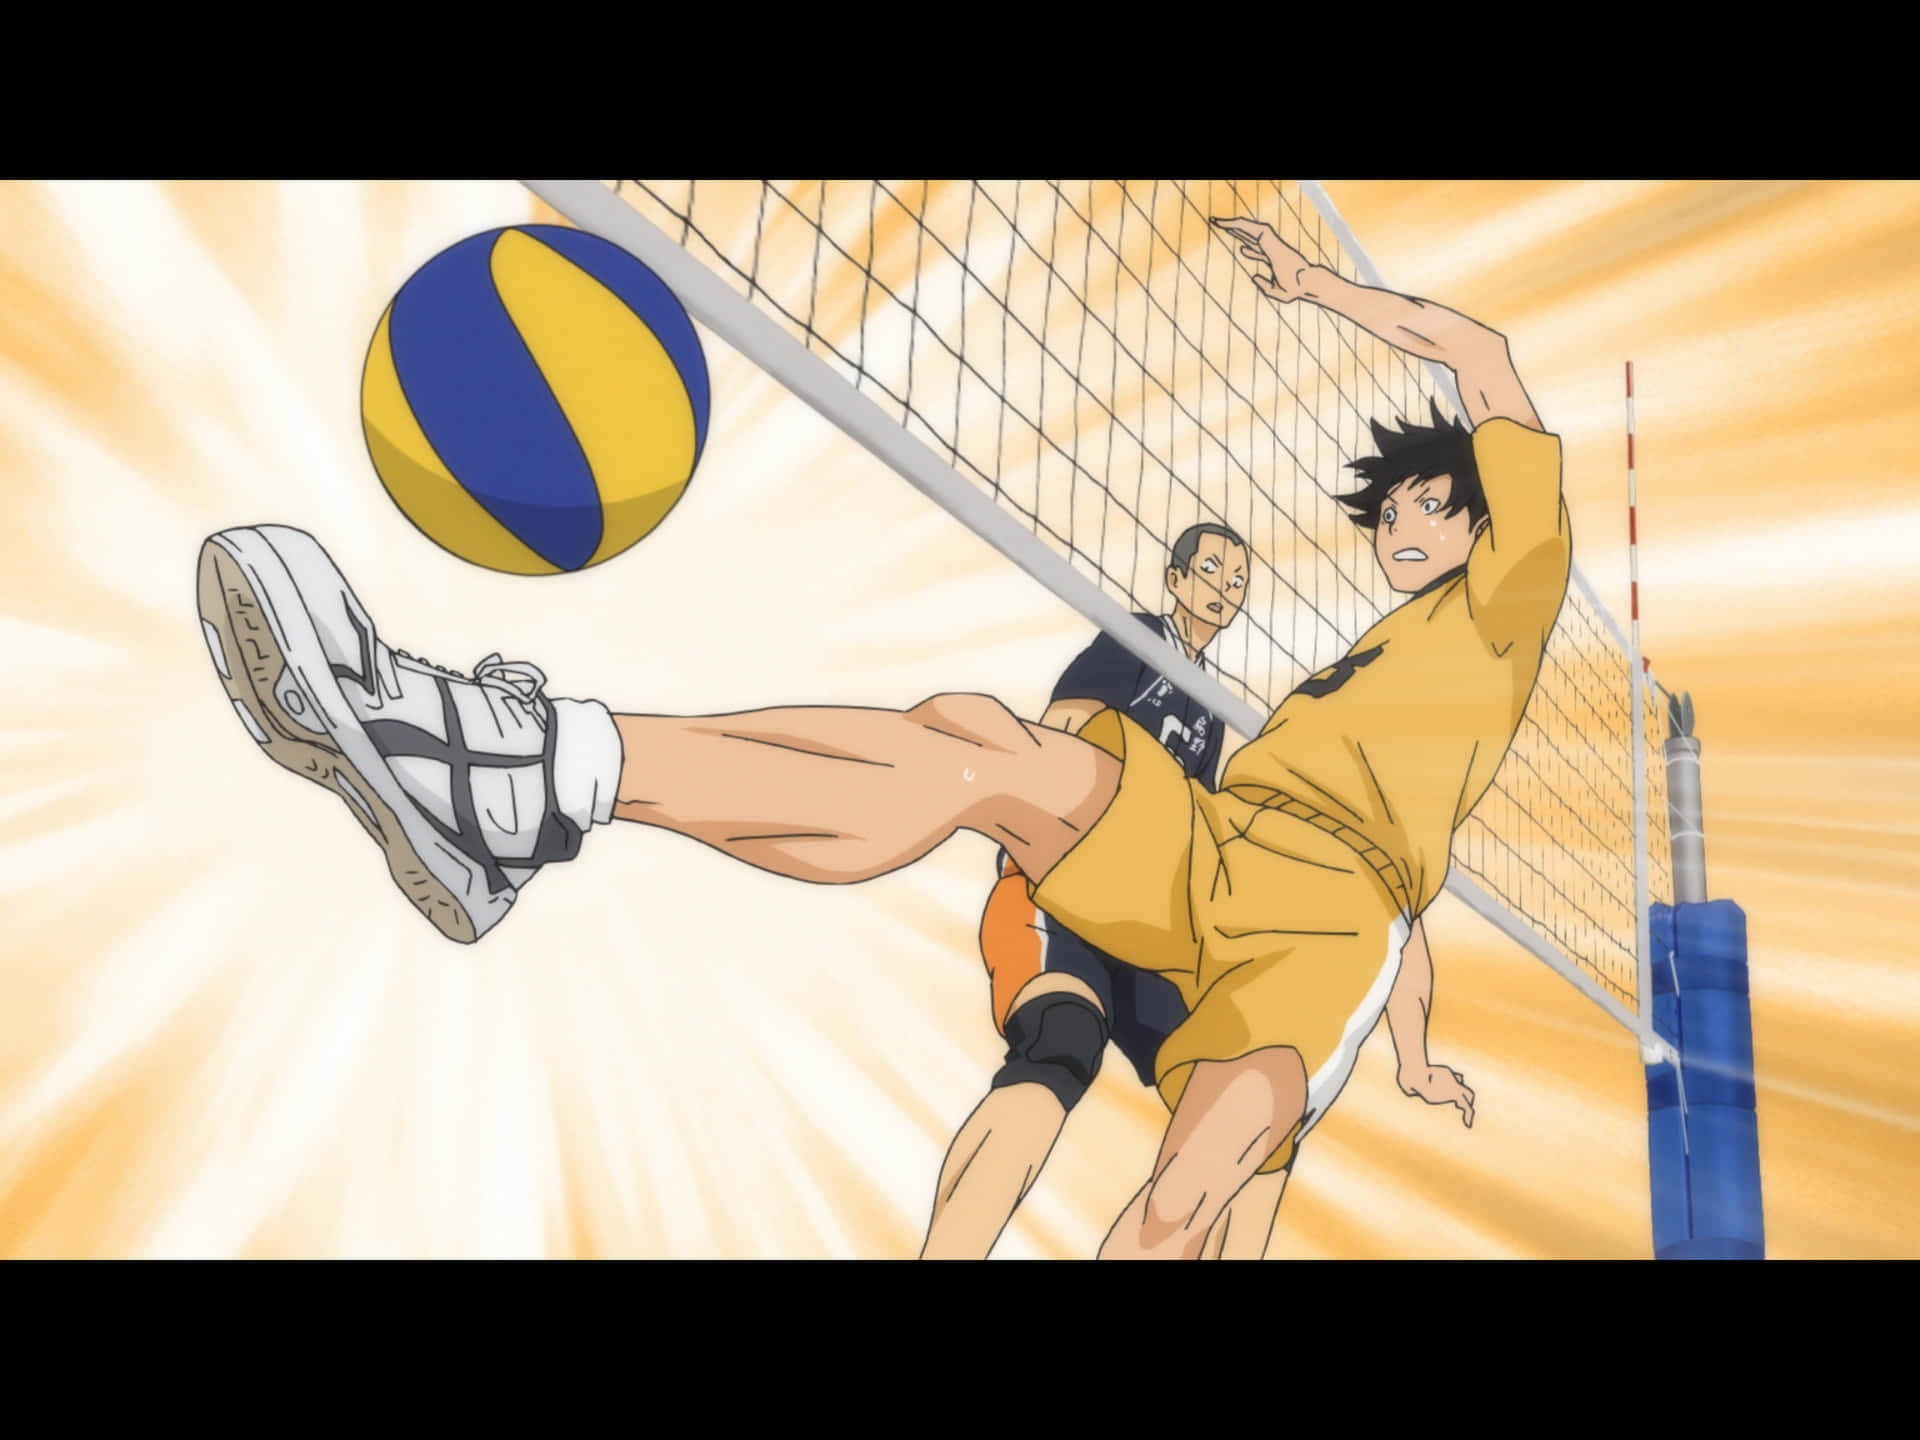 Caption: Johzenji High Boys' Volleyball Team in Action Wallpaper